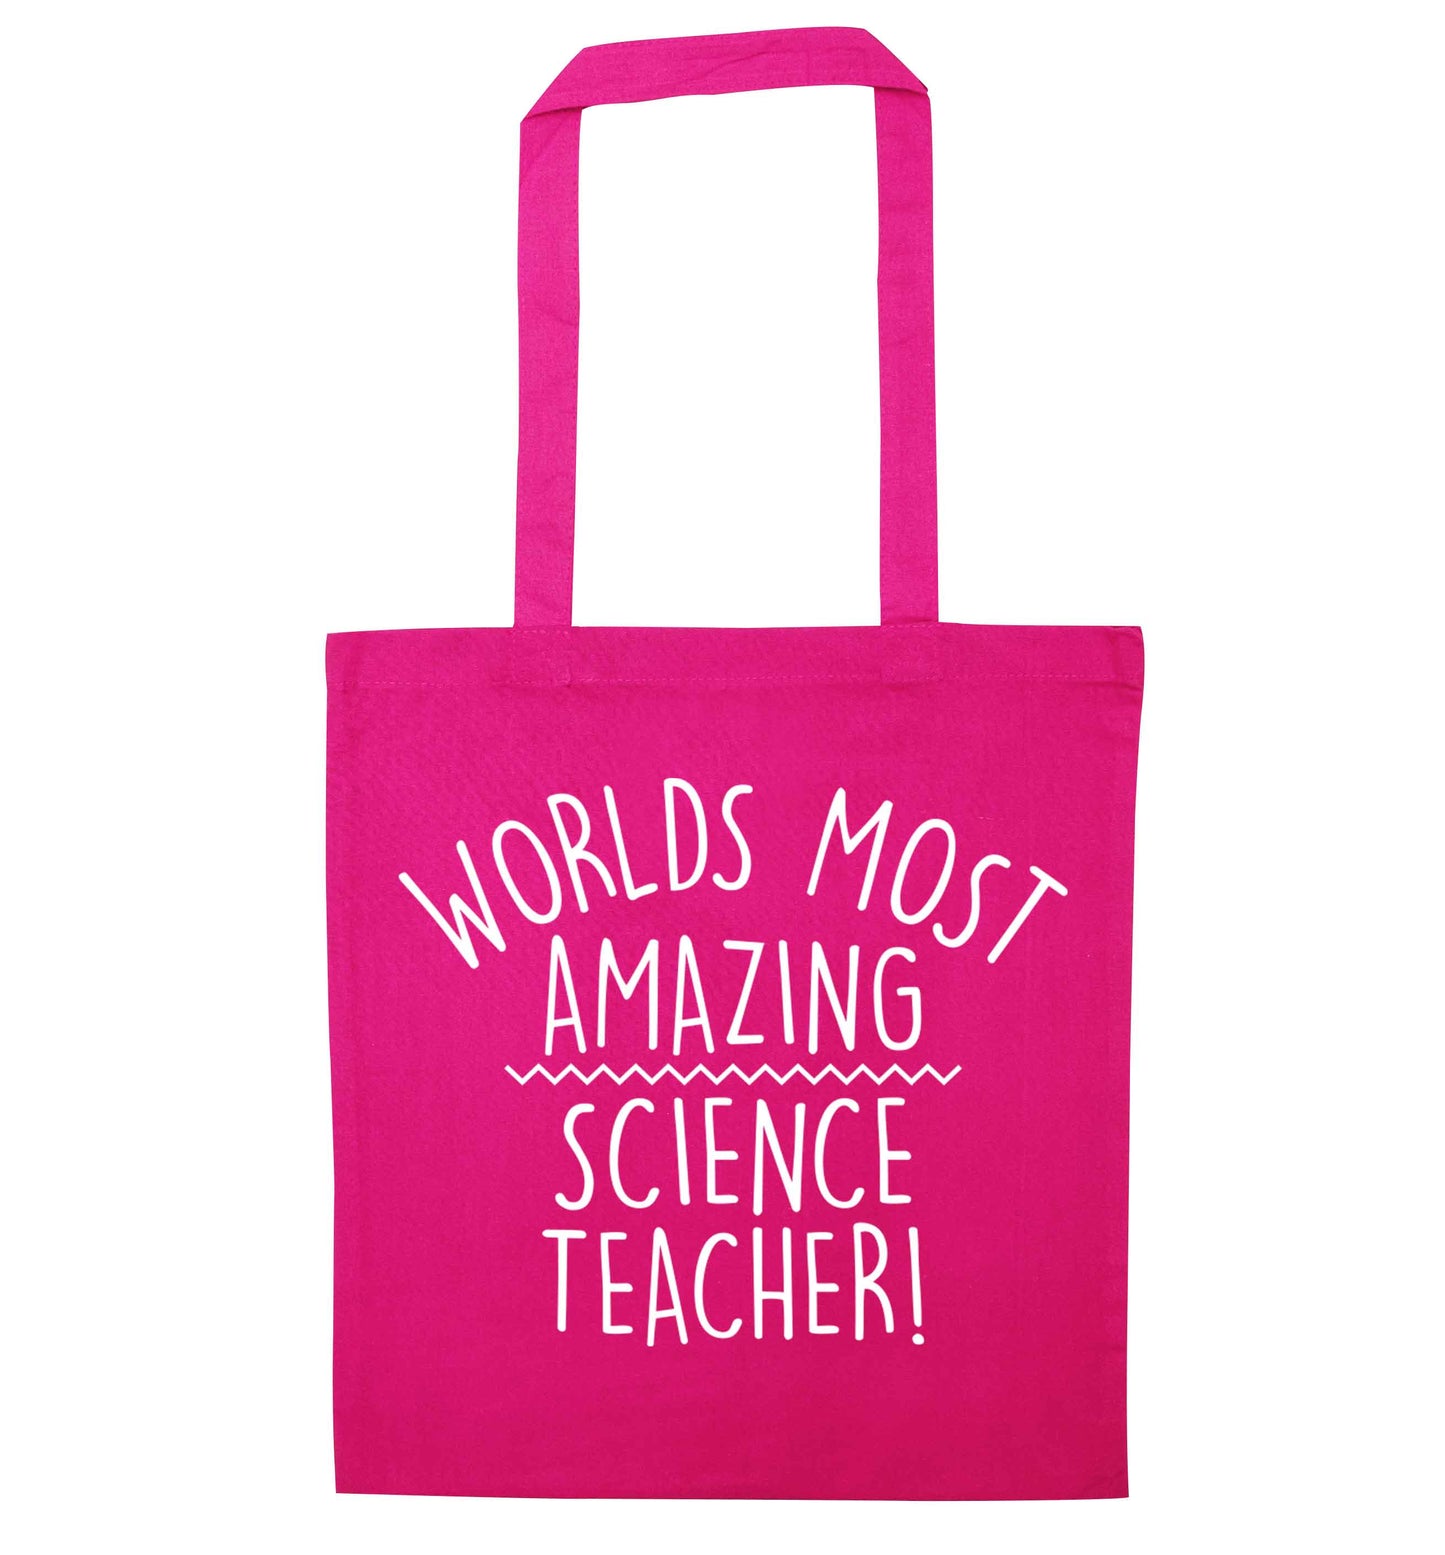 Worlds most amazing science teacher pink tote bag